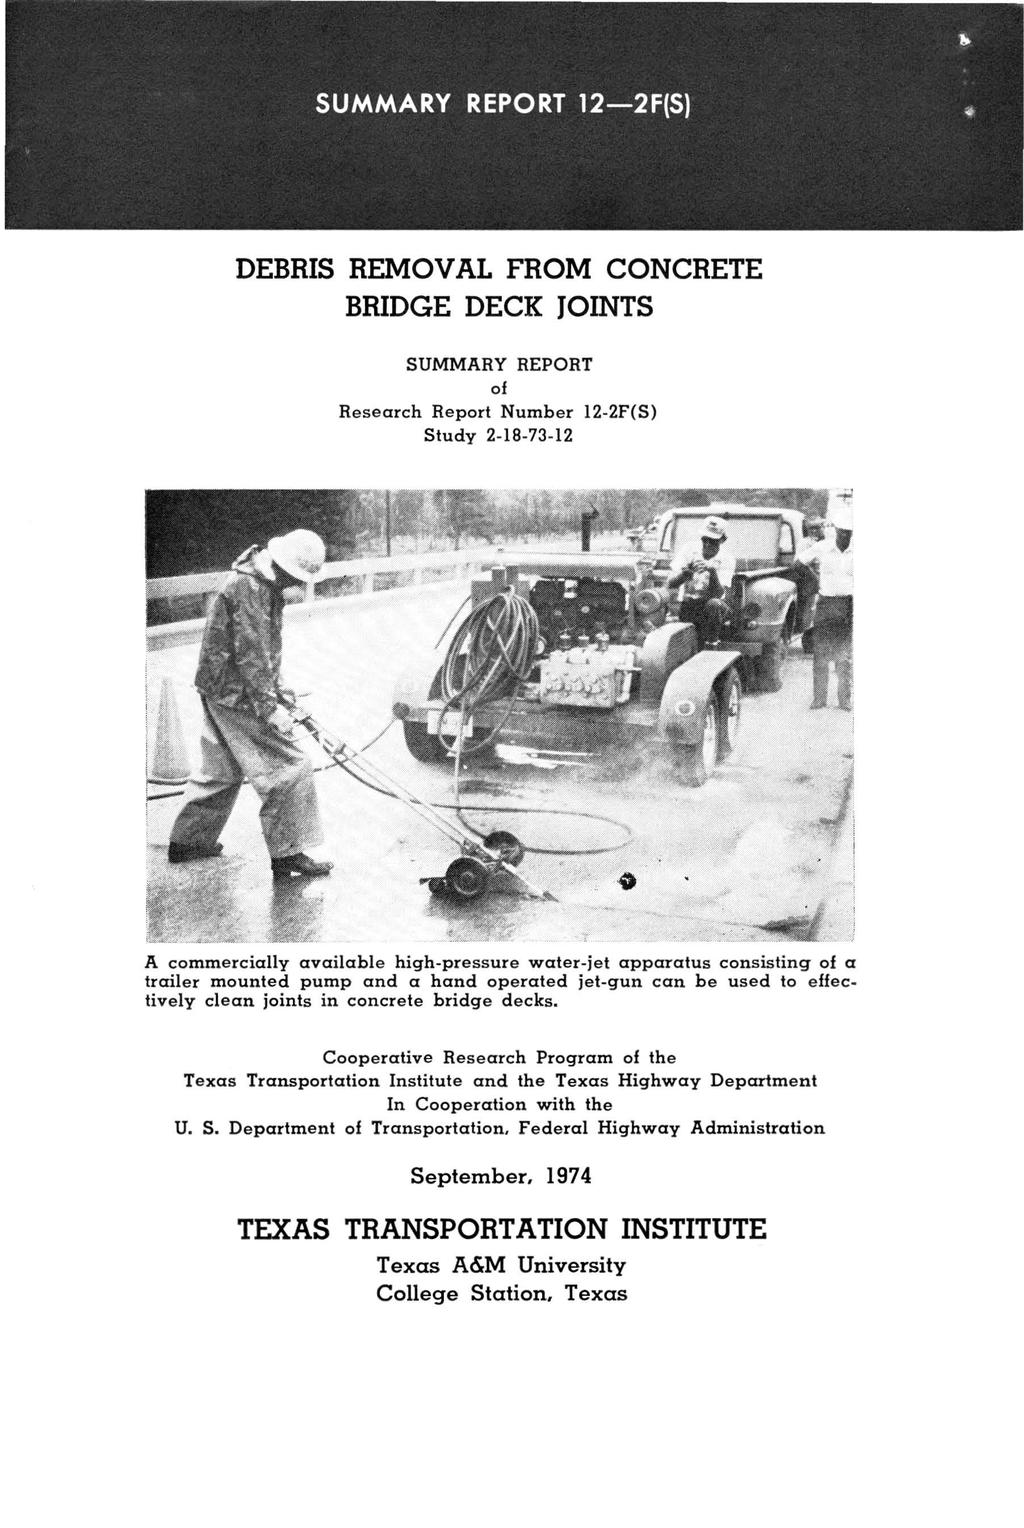 DEBRIS REMOVAL FROM CONCRETE BRIDGE DECK JOINTS SUMMARY REPORT of Research Report Number 12-2F(S) Study 2-18-73-12,«%'.J.... _.,;.